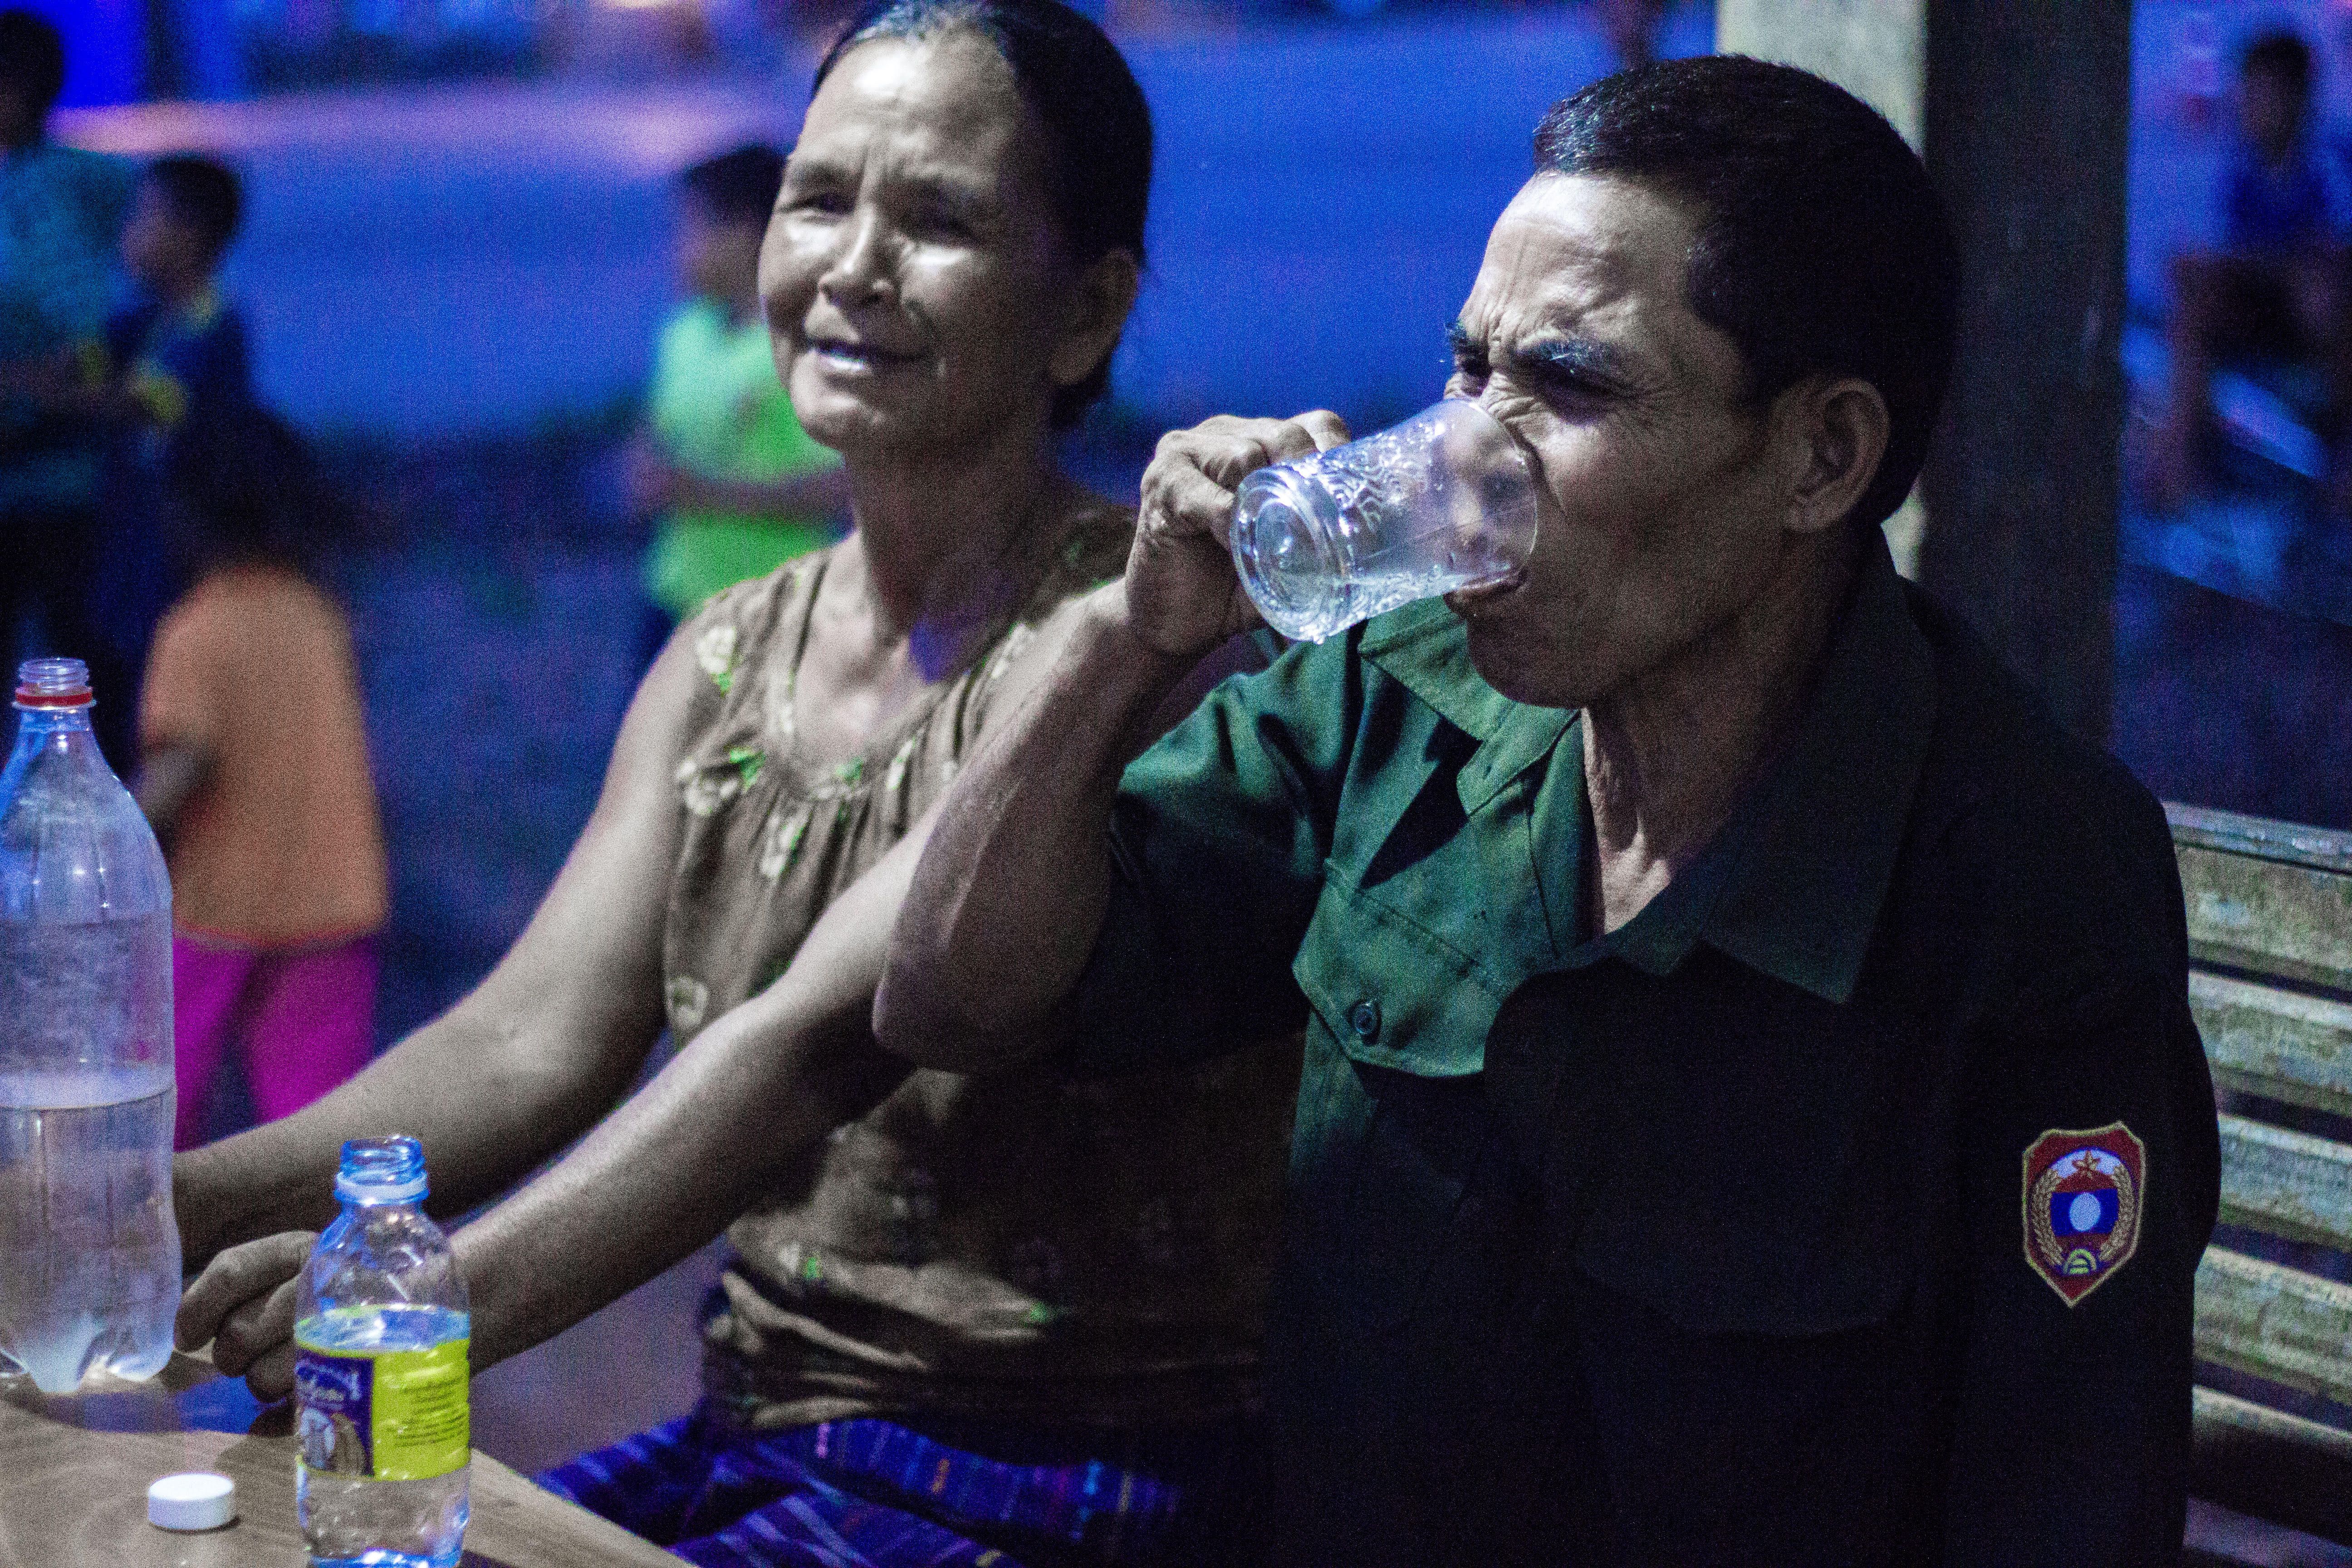 Mr. and Mrs. Vounta take turns drinking Lao Lao while celebrating their visitors. Image by Erin McGoff. Laos, 2017. Image by Erin McGoff. Laos, 2017.